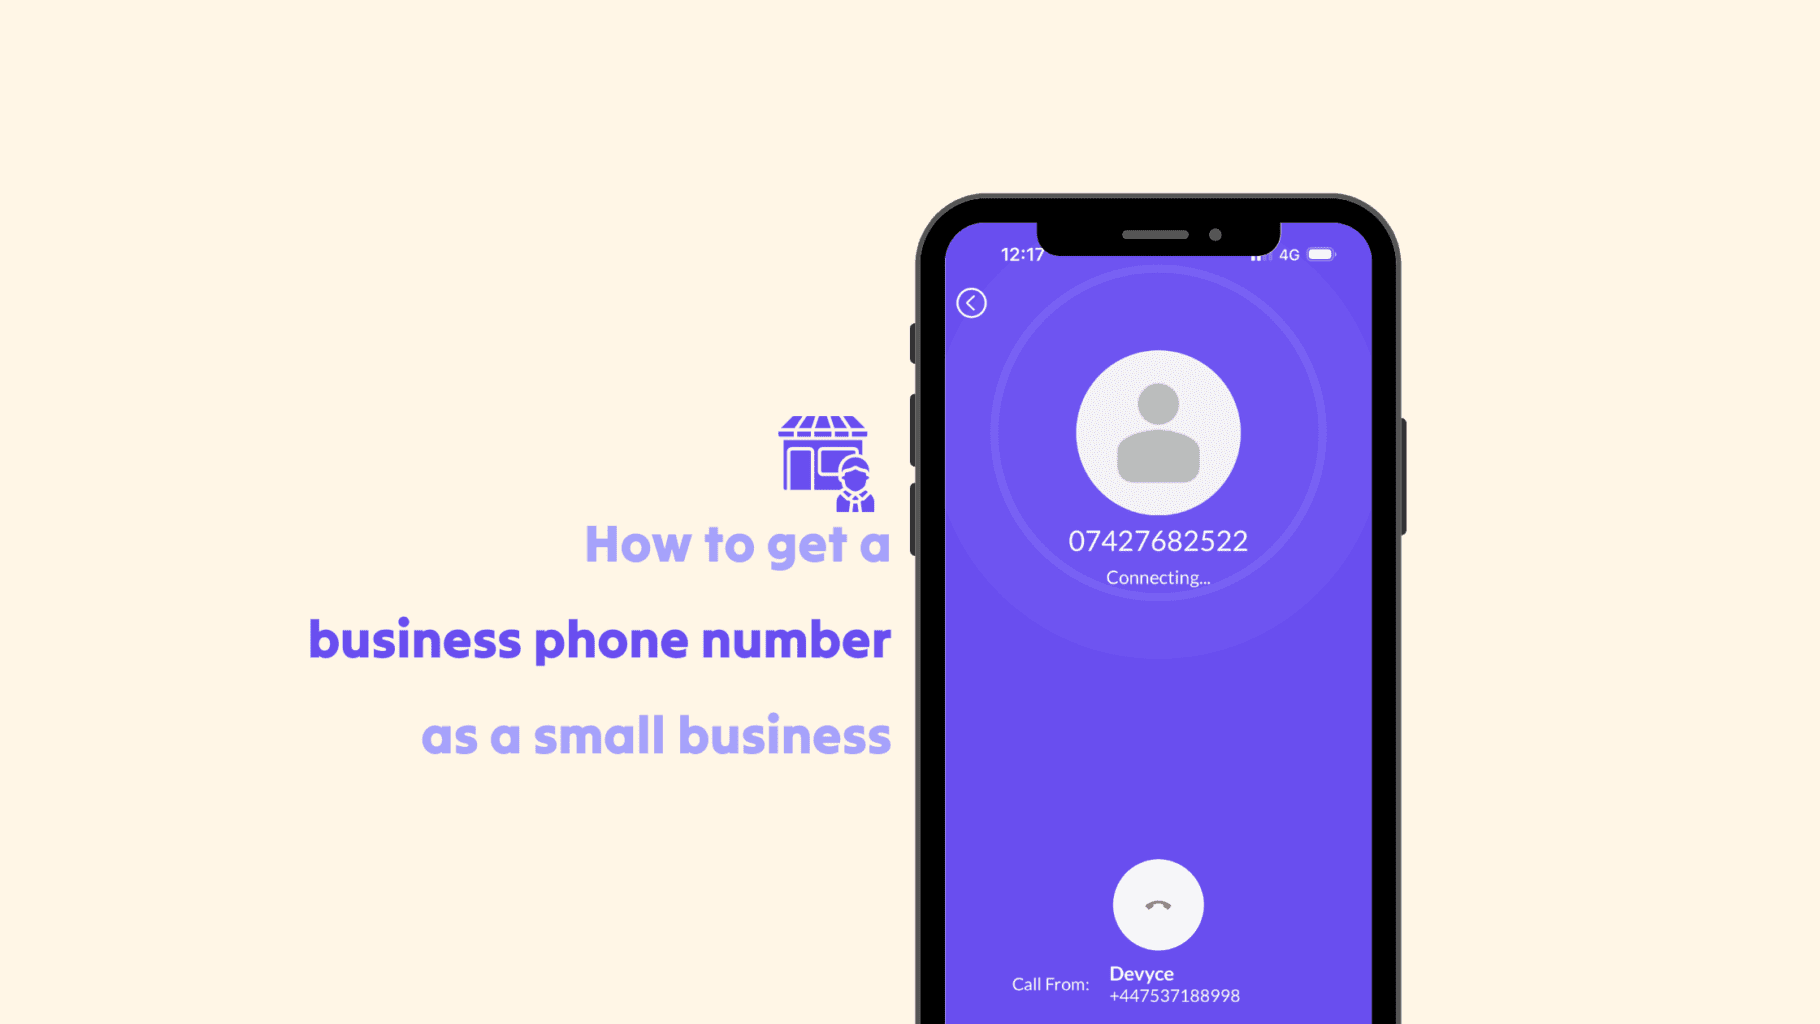 How to get a business phone number as a small business